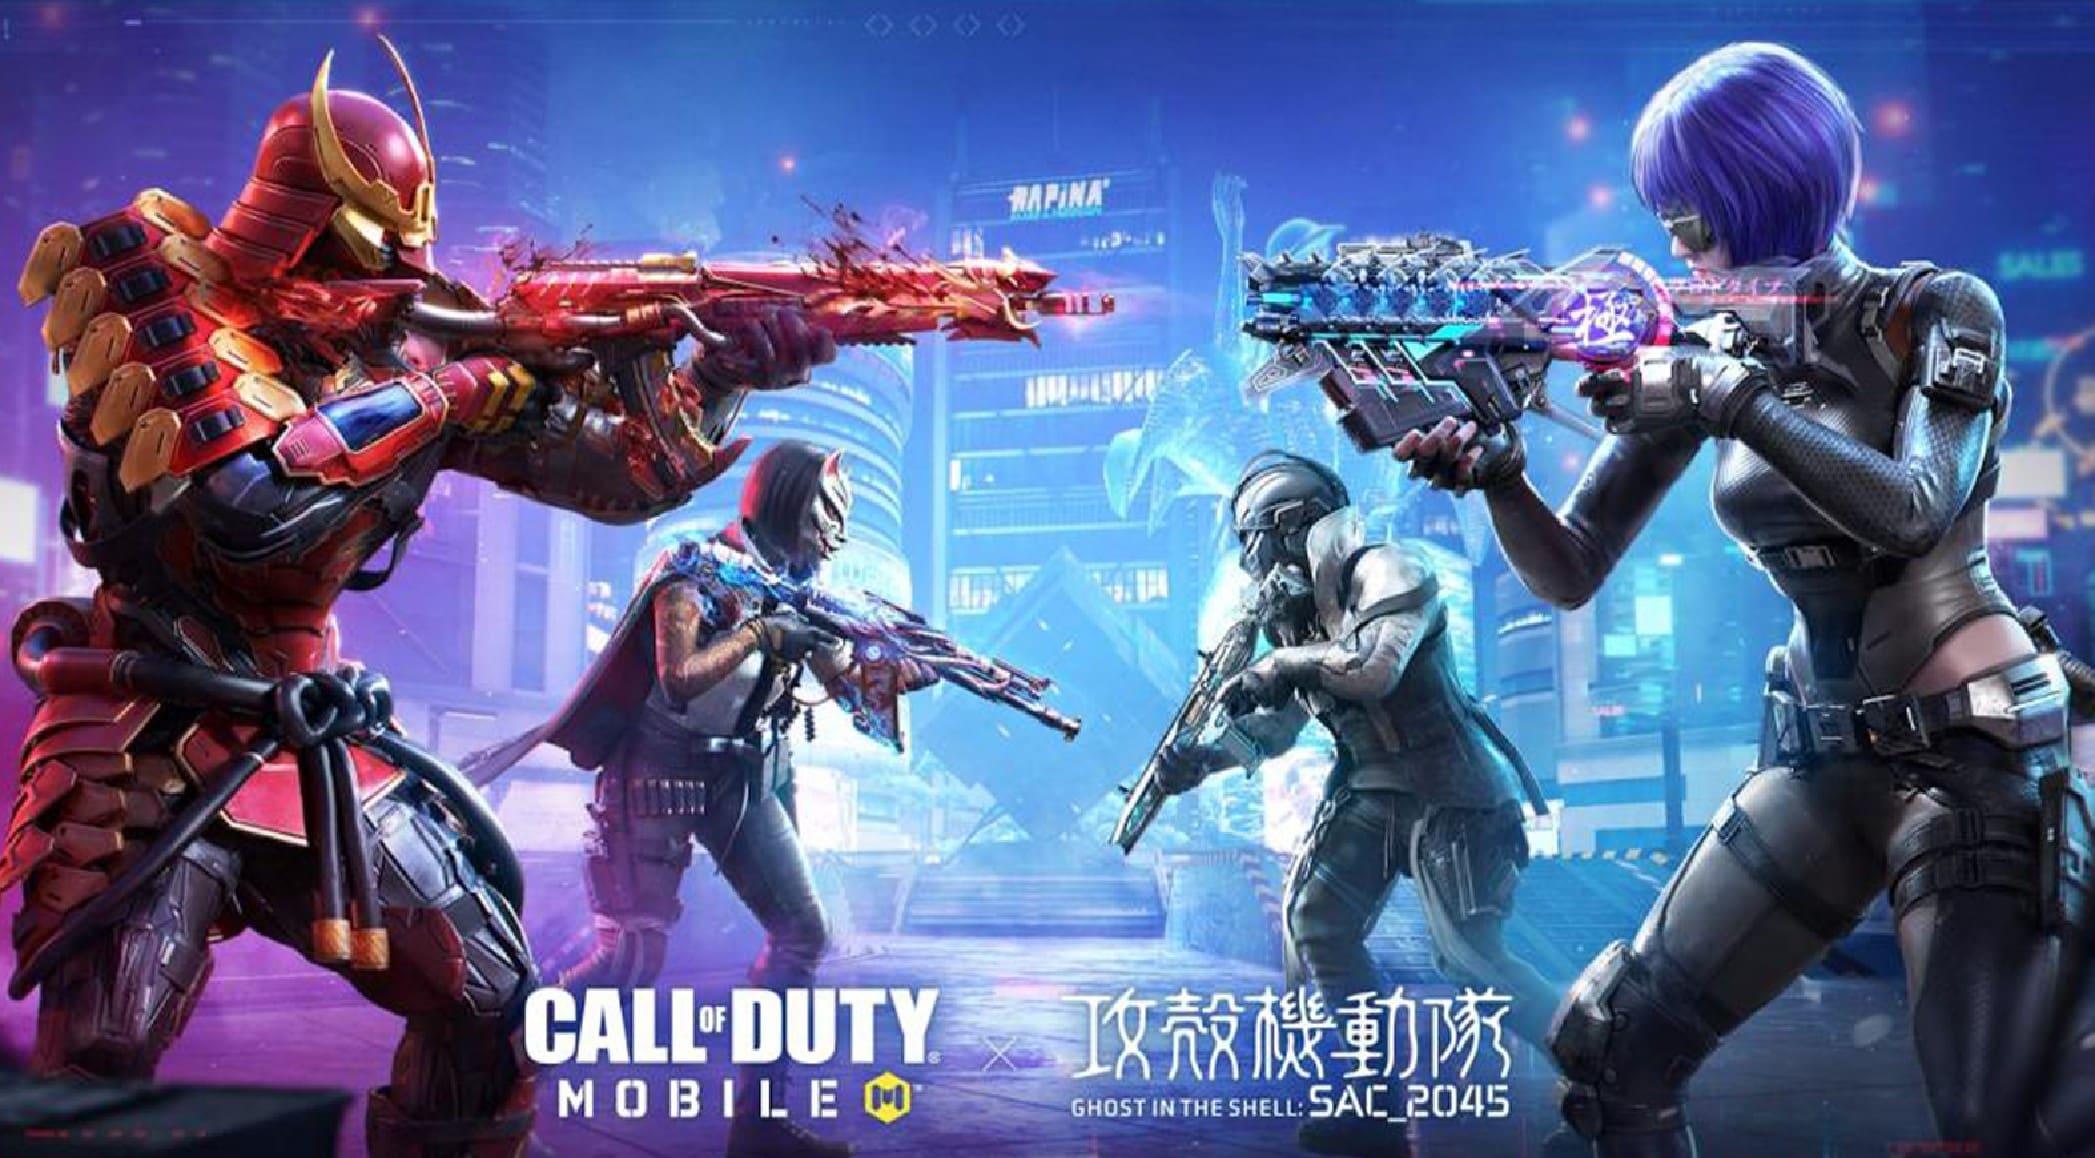 Download & Play Call of Duty Mobile Season 9 on PC & Mac